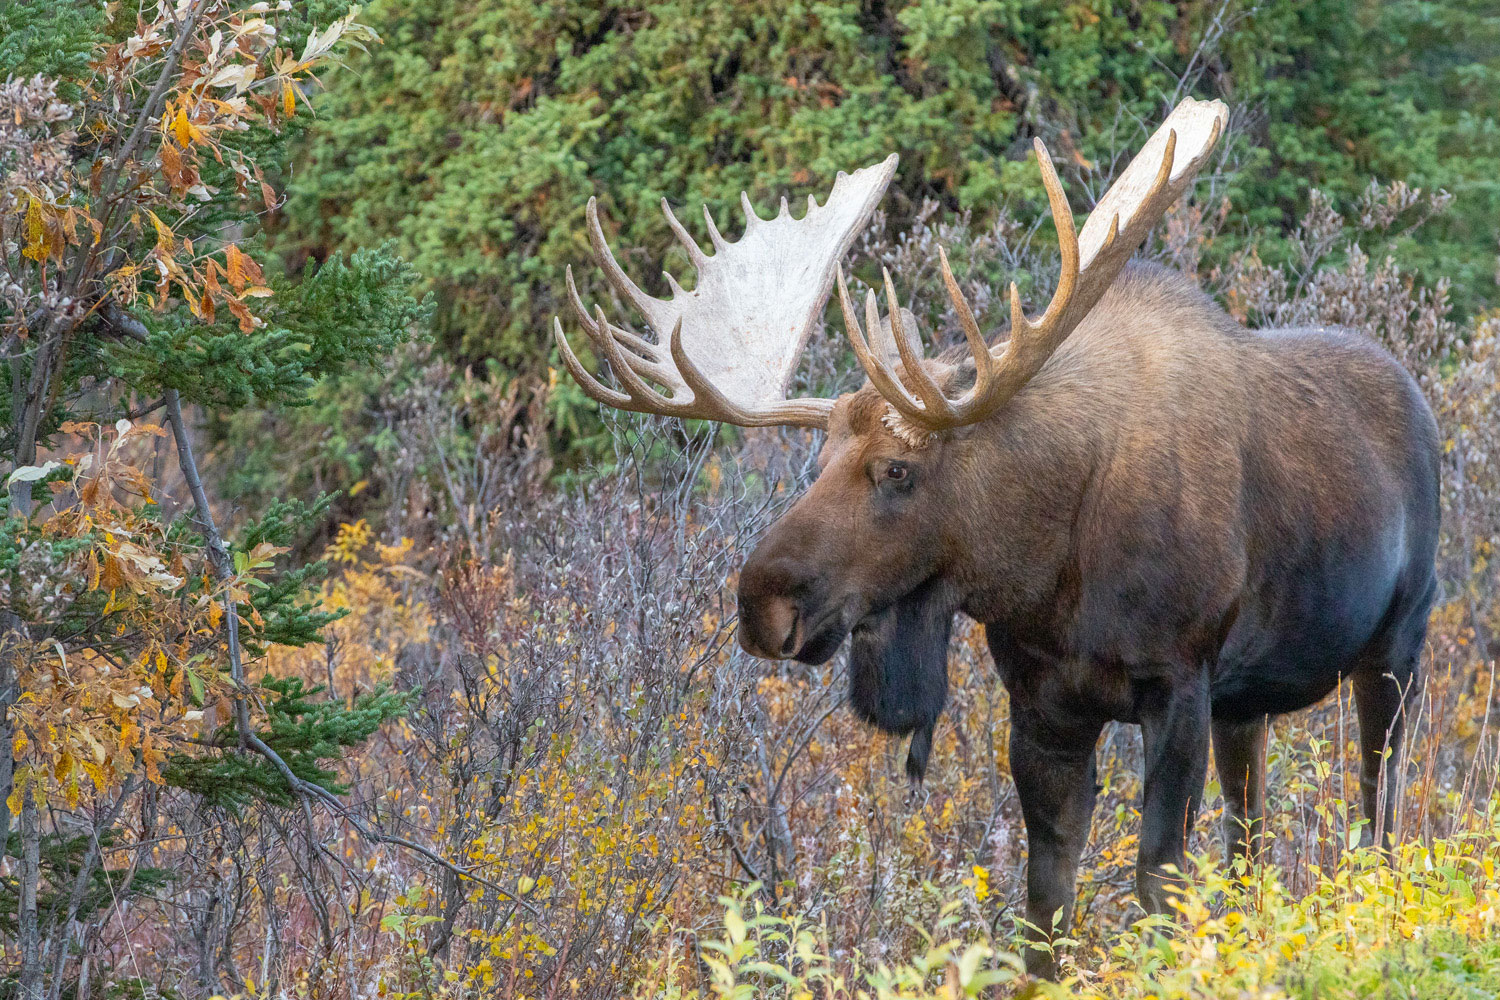 It is the September rut, and this large male is determined to send off a younger male.